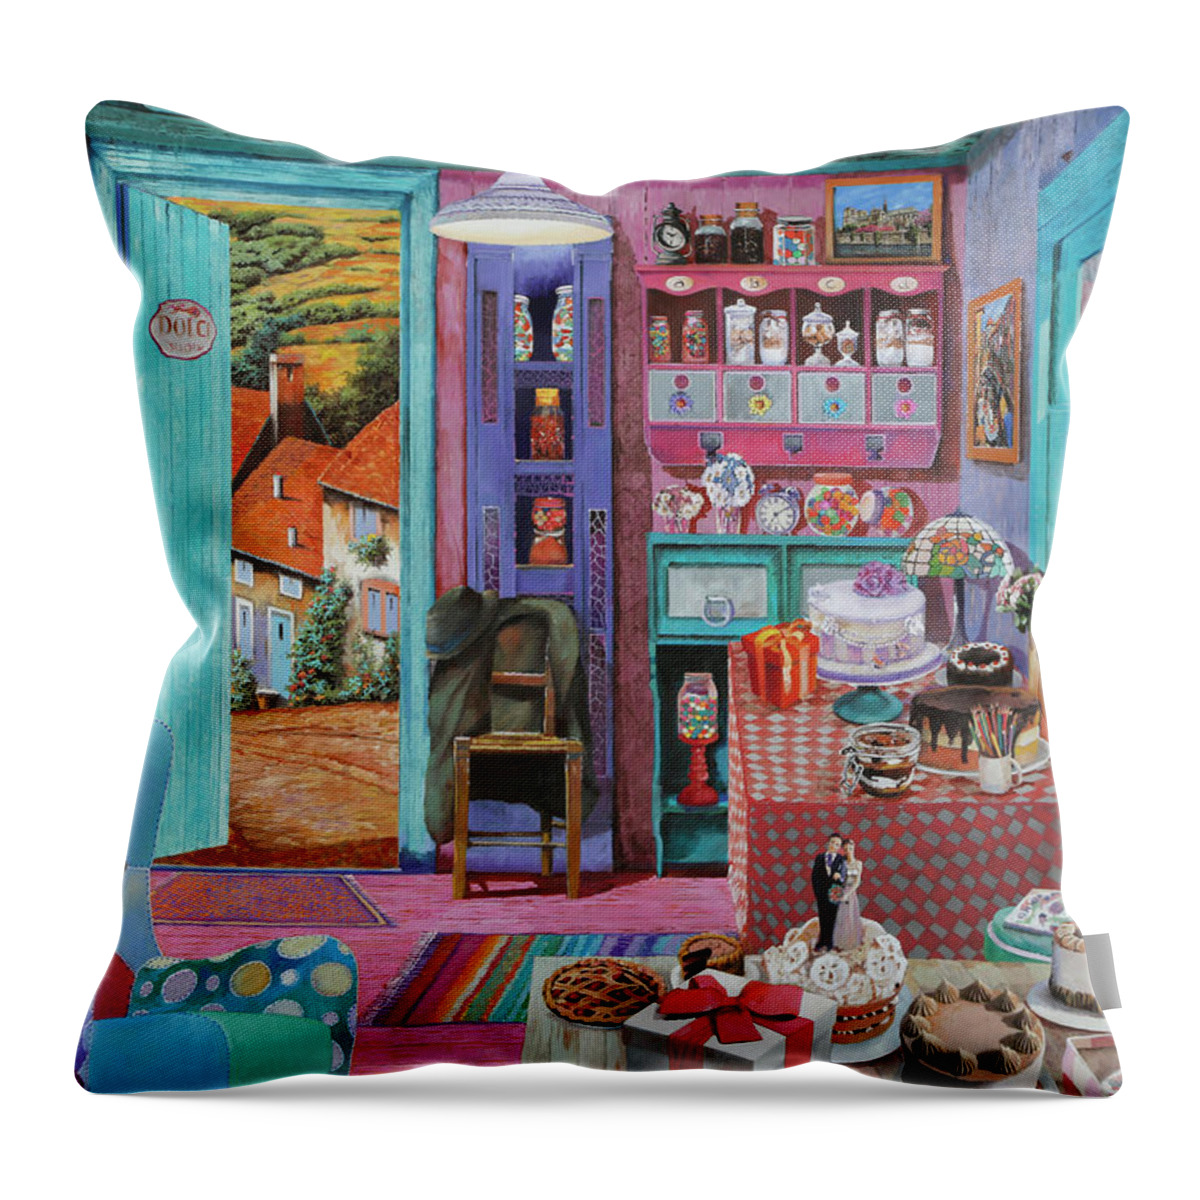 Cakes Throw Pillow featuring the painting I Dolci by Guido Borelli